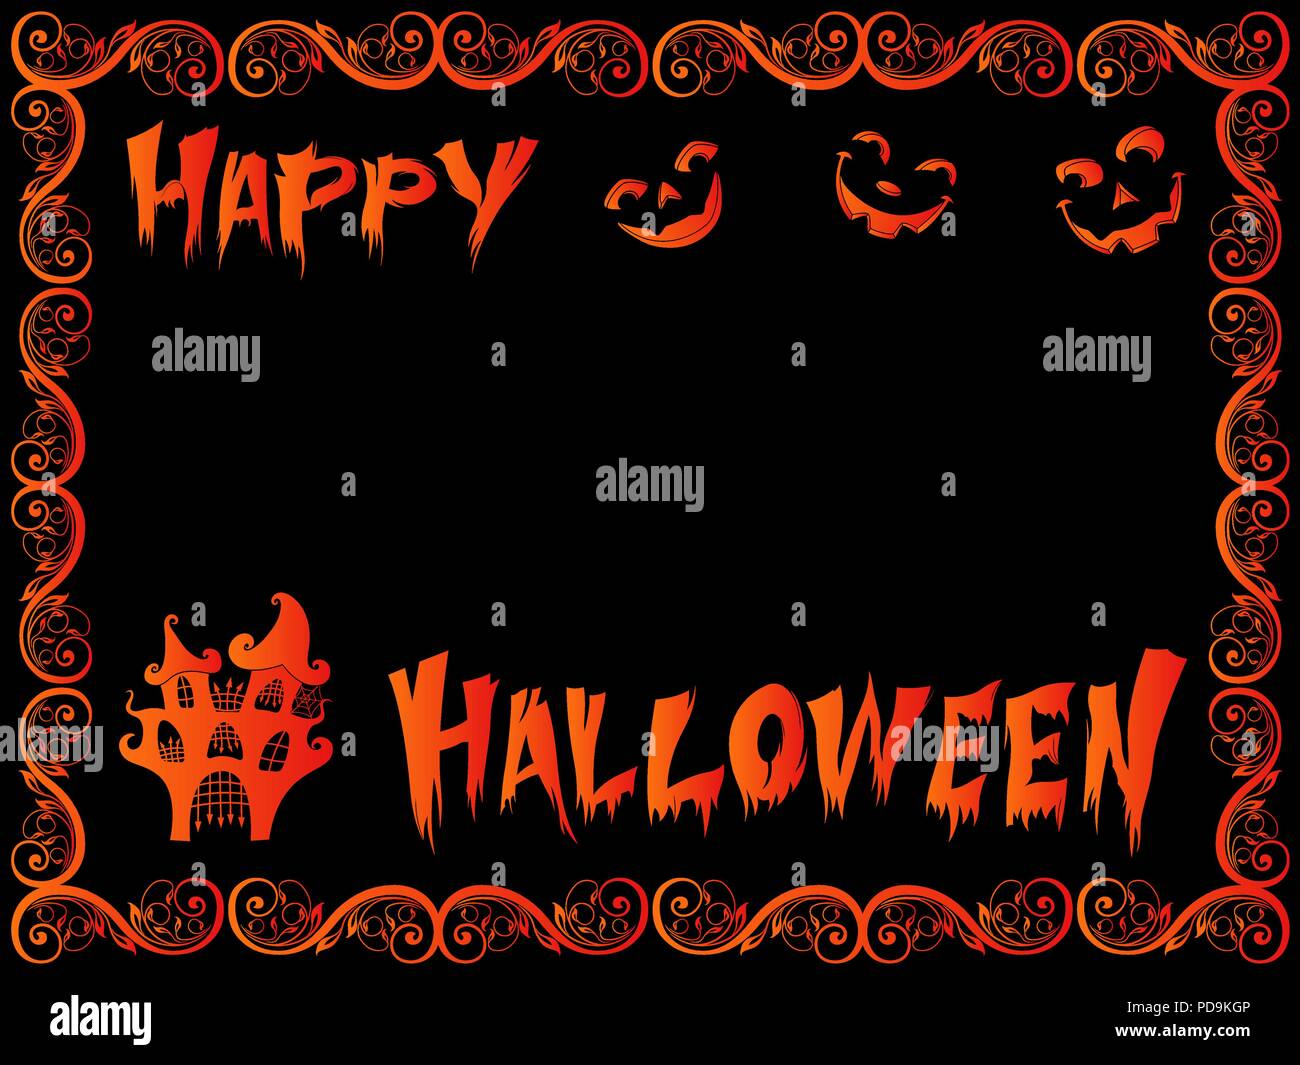 Postcard with bright orange the wishes of the happy Halloween and with decorative frame on the black background, vector hand drawing Stock Vector